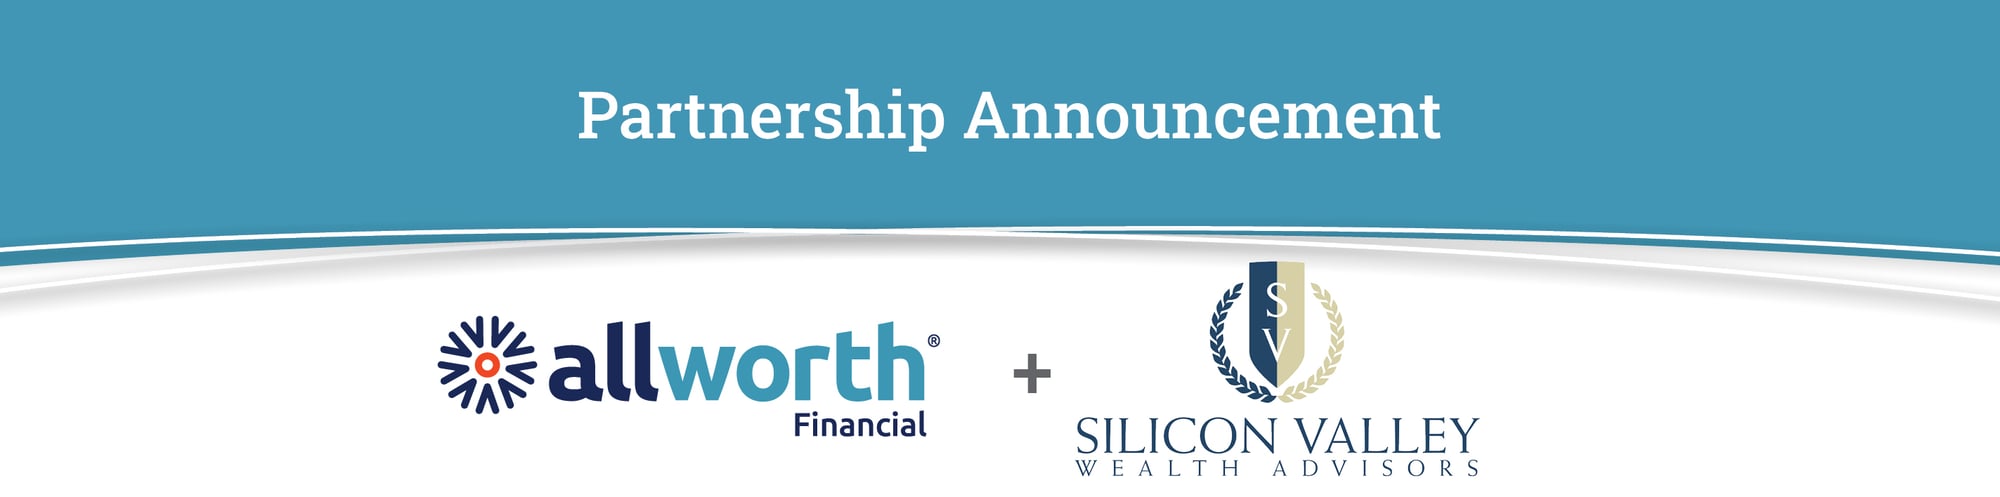 Partnership announcement for Allworth and Silicon Valley Wealth Advisors, displaying both logos side-by-side